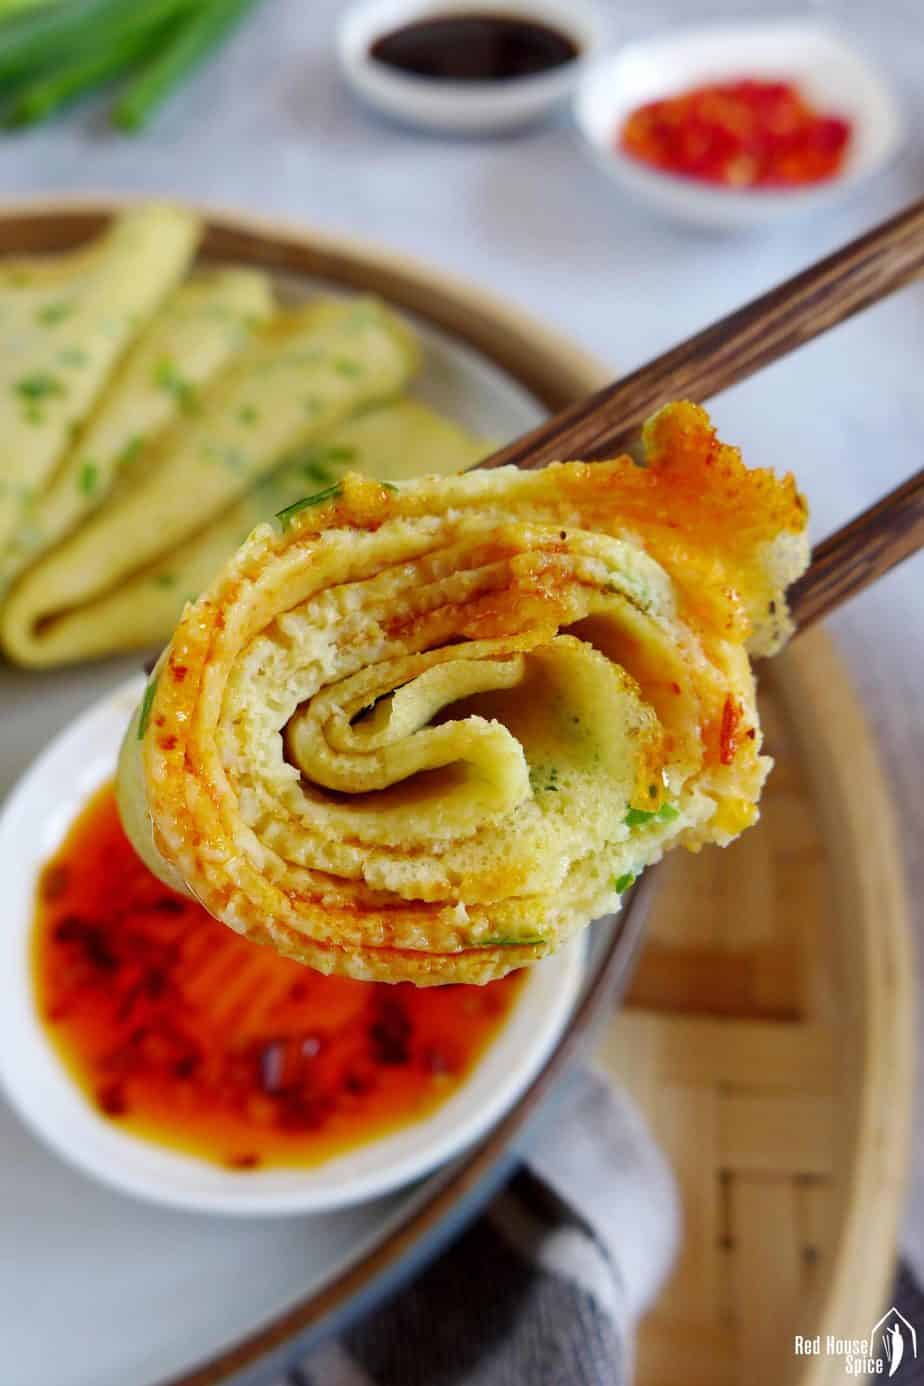 A rolled up egg & scallion crepe dipped into chili sauce